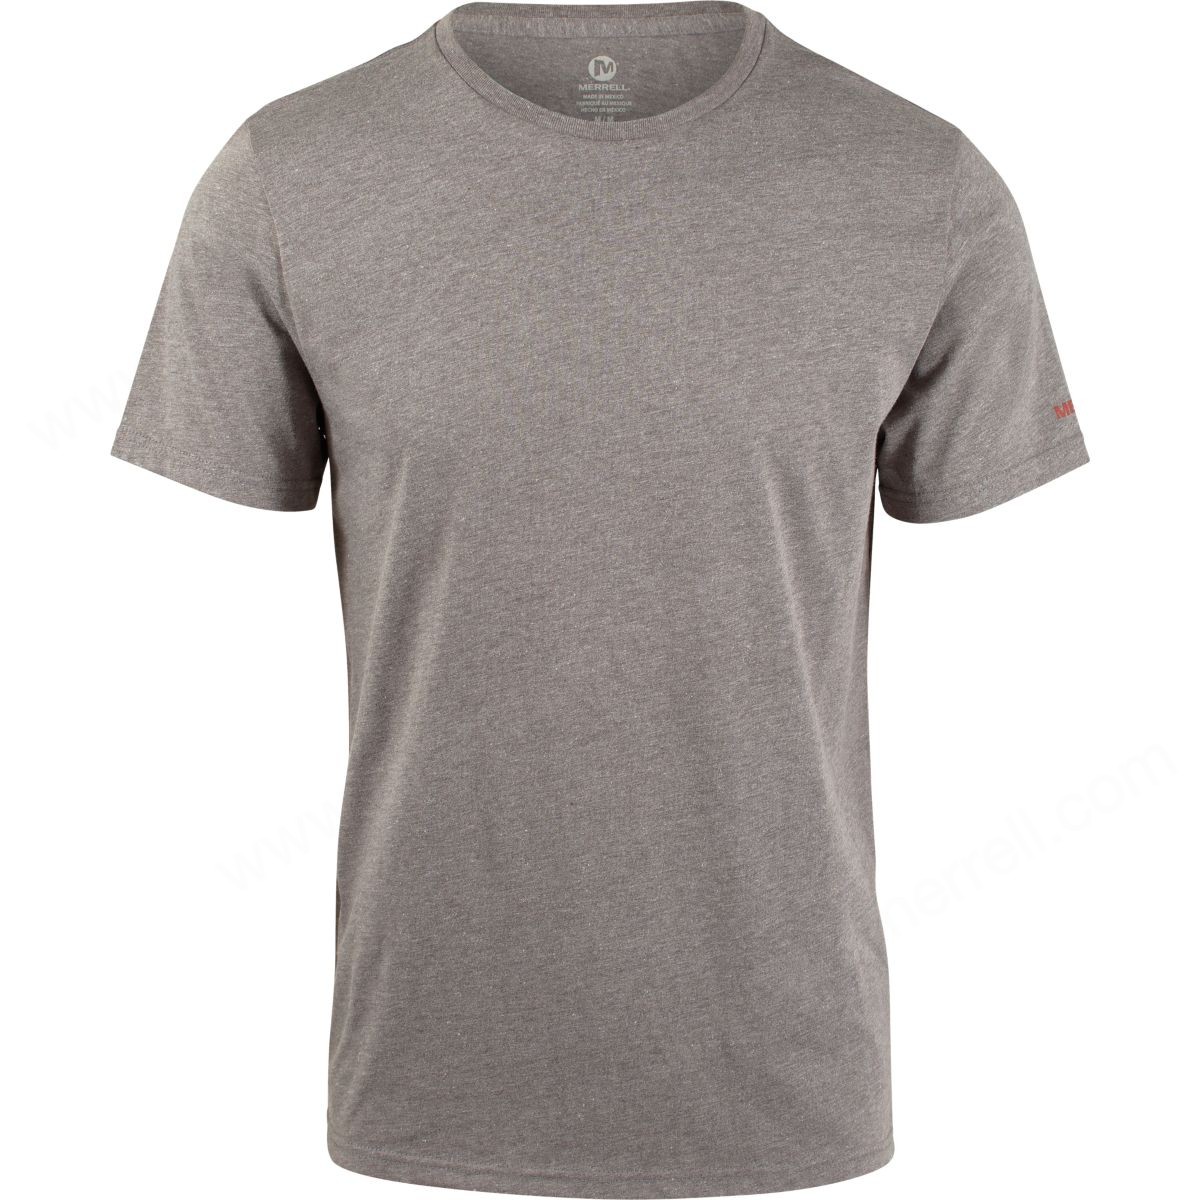 Merrell Mens's Packed Graphic Tees Heather Grey - Merrell Mens's Packed Graphic Tees Heather Grey